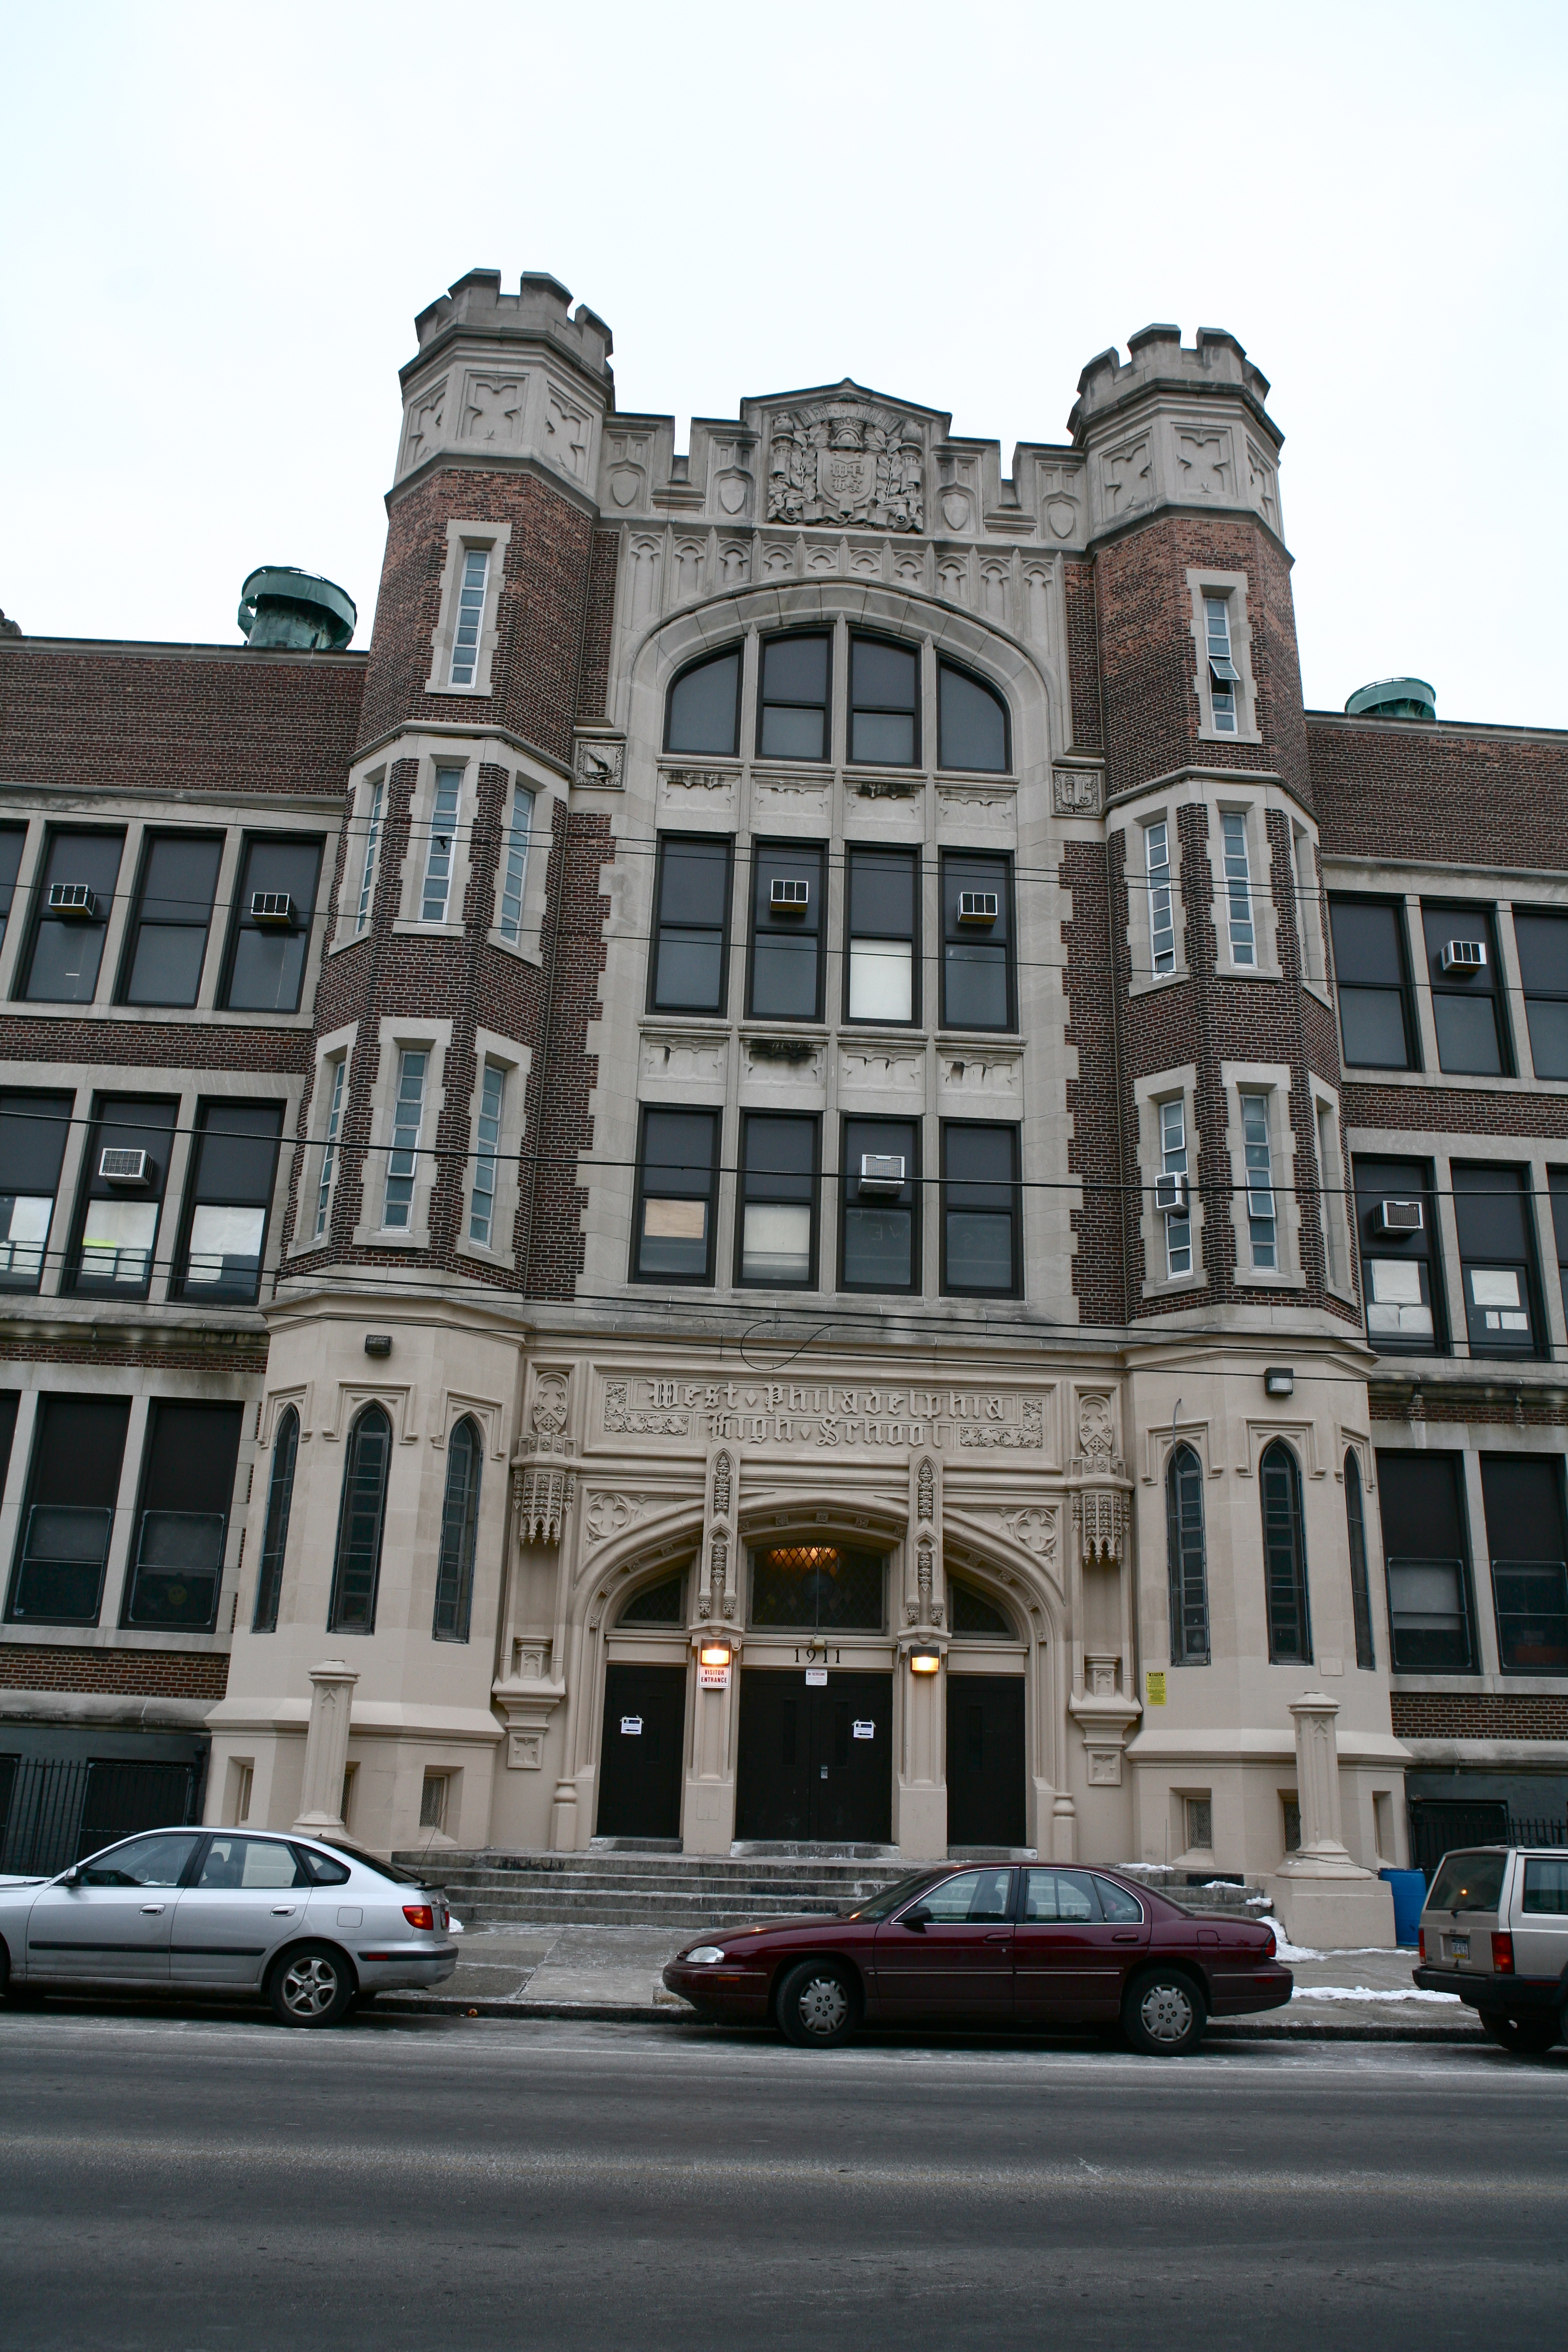 West Philadelphia High School, a five-story, brick and limestone structure built in 1911-1912 at a cost of $1.3 million.